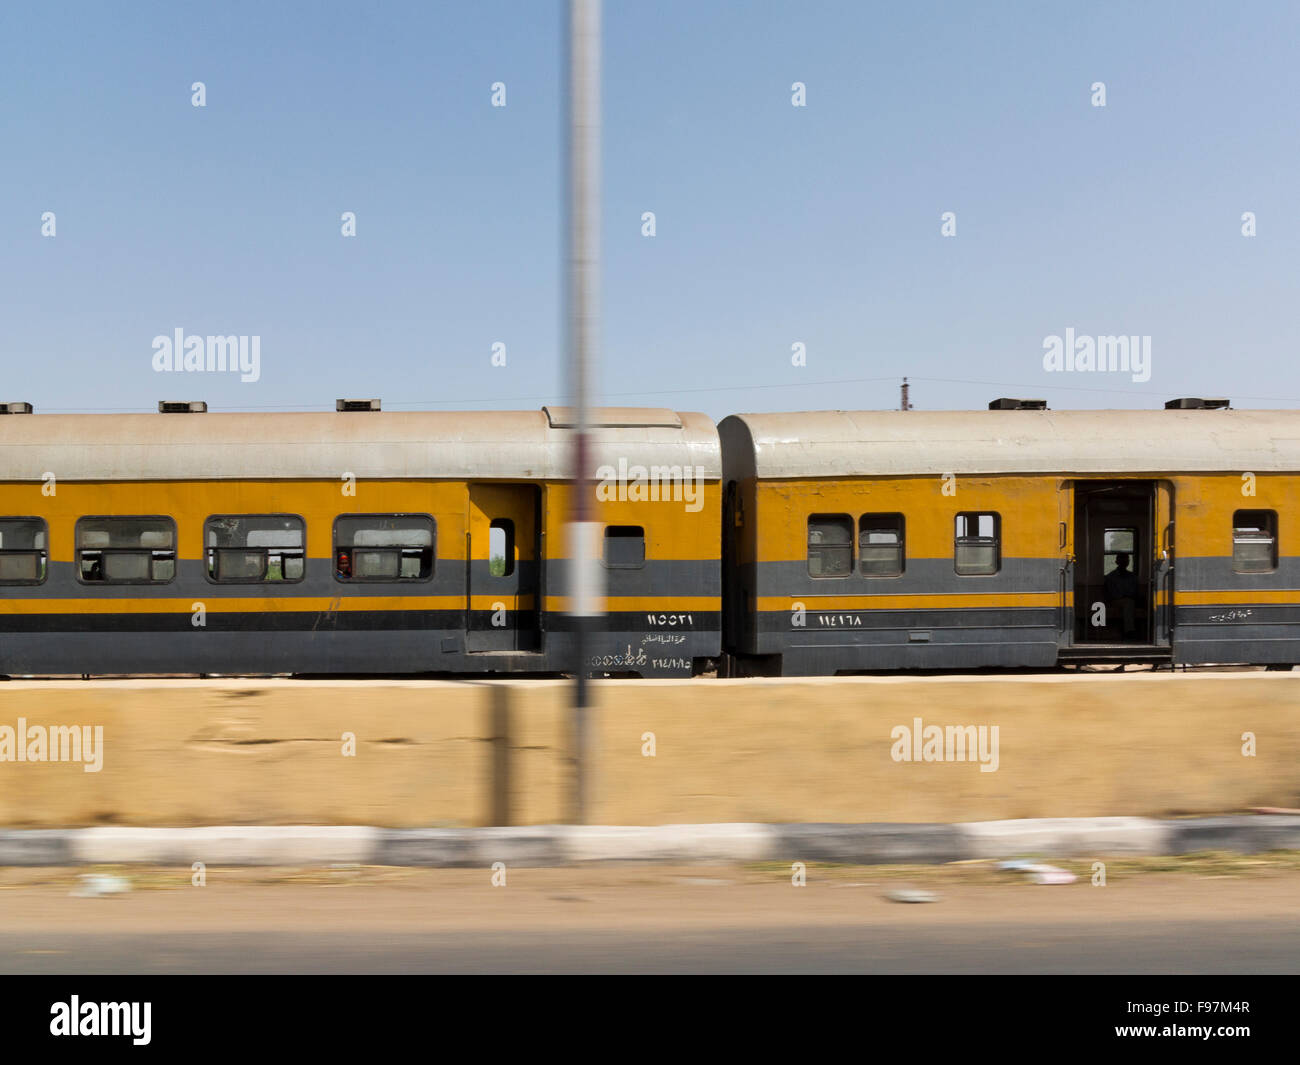 Train carriages passing at speed with movement blur on road and lamp post, Egypt, Africa Stock Photo